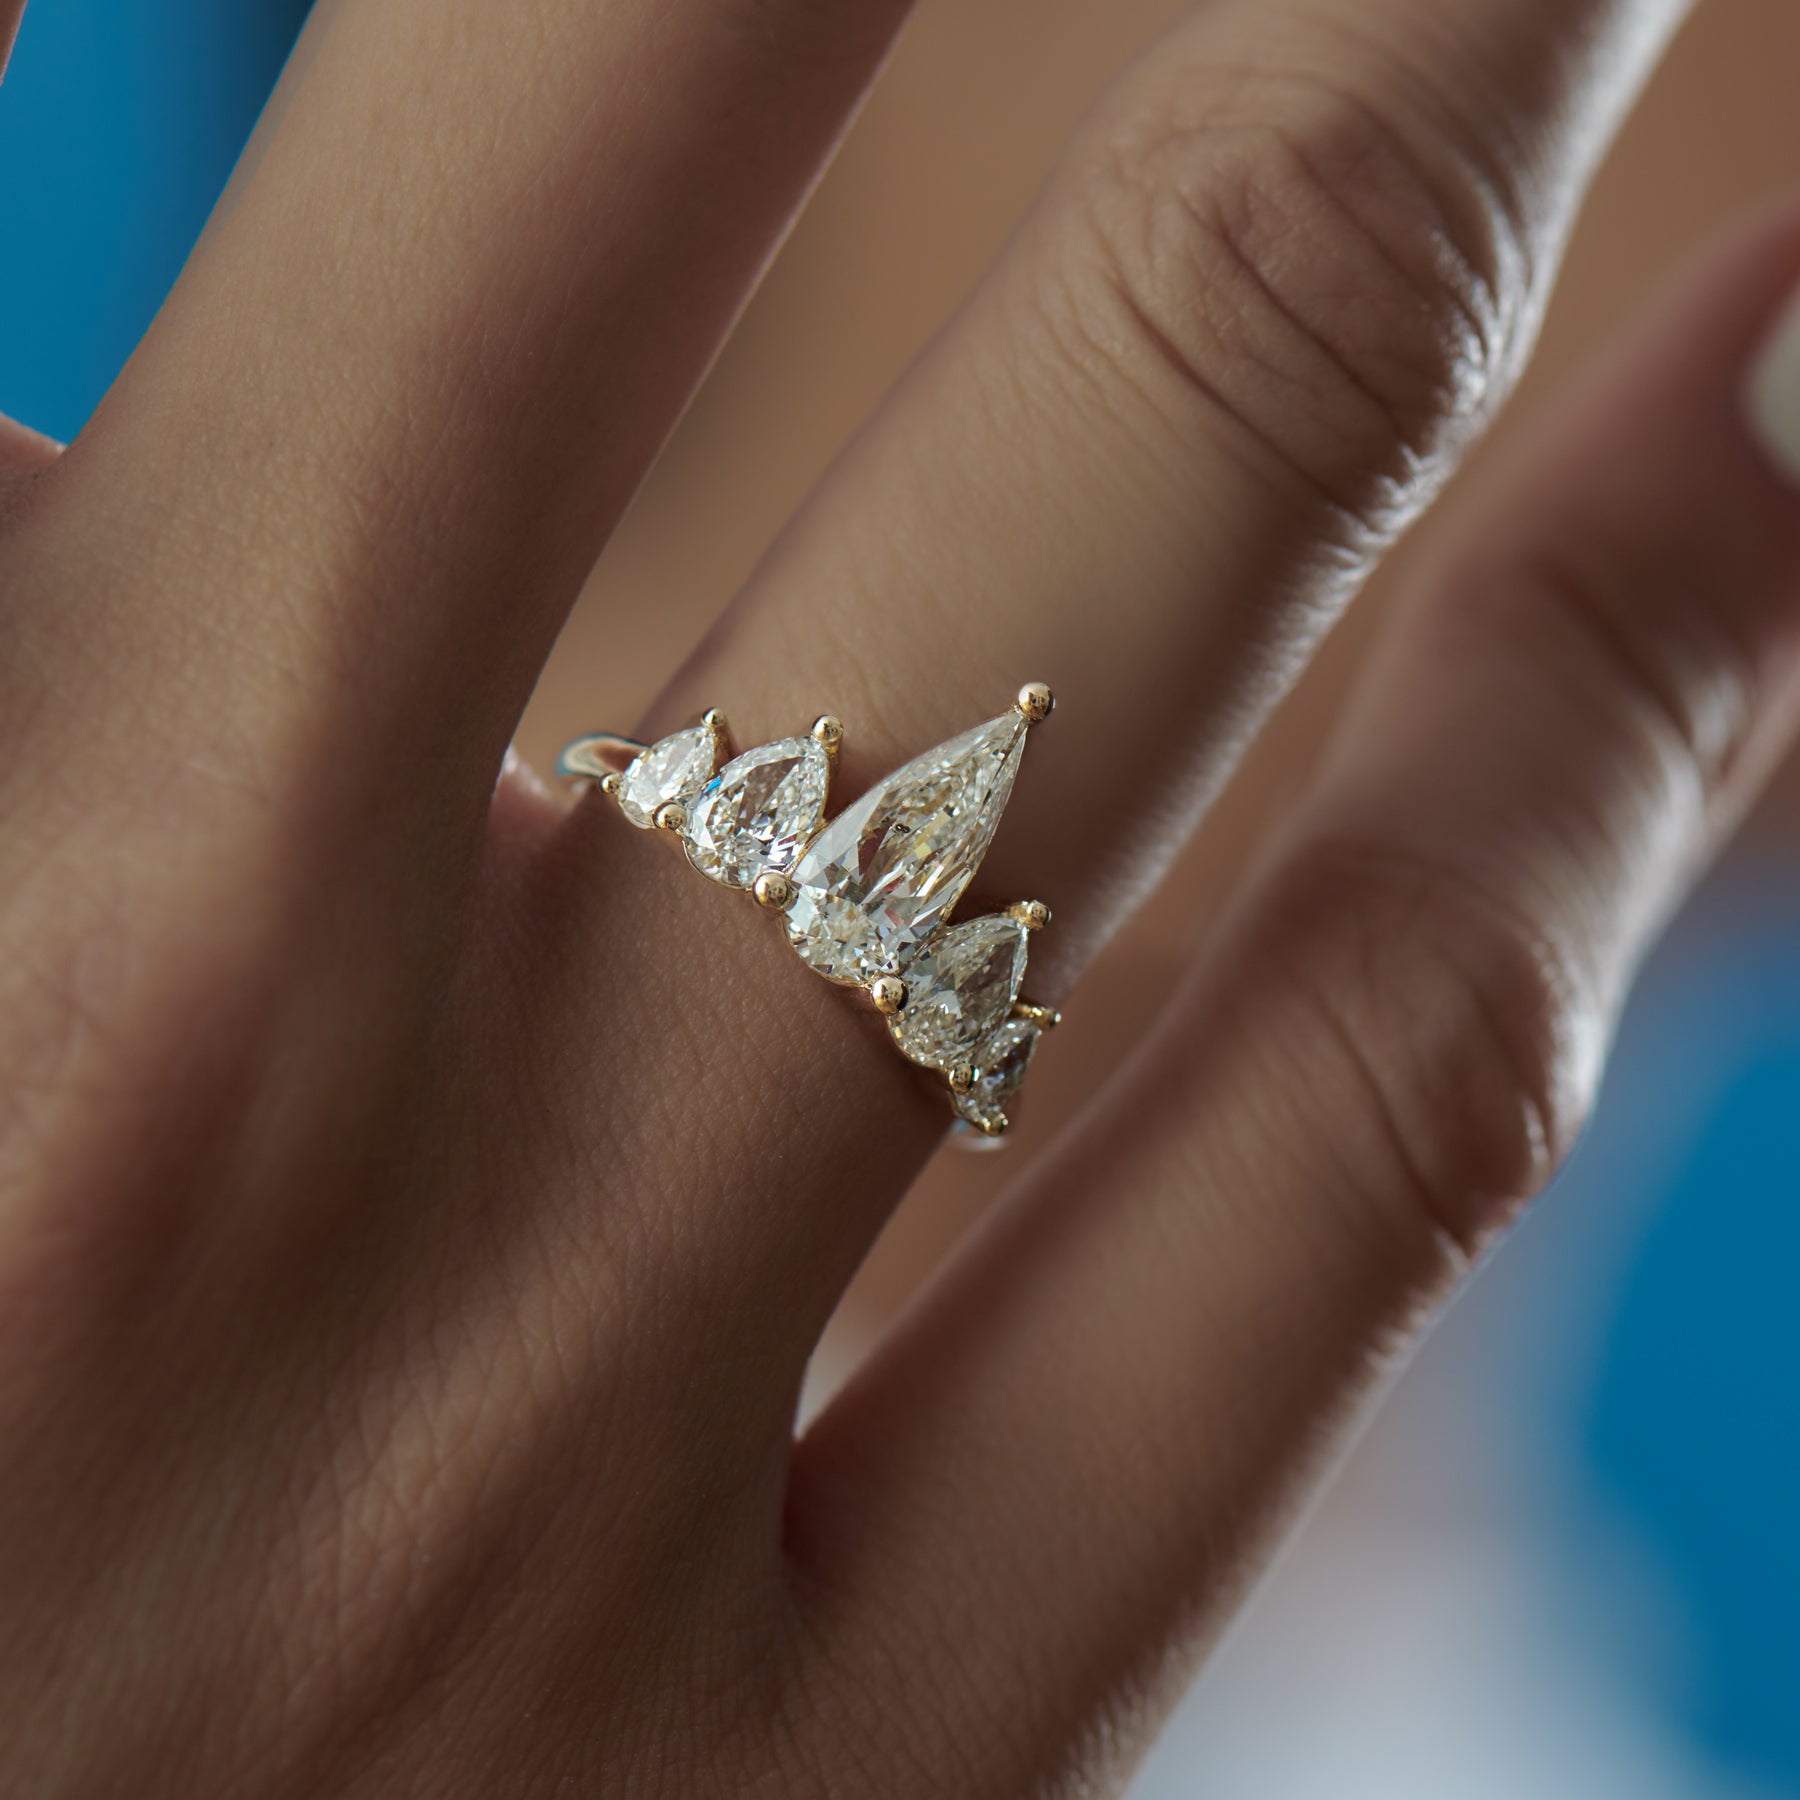 54 Popular Styles of Engagement Rings : Double halo pear